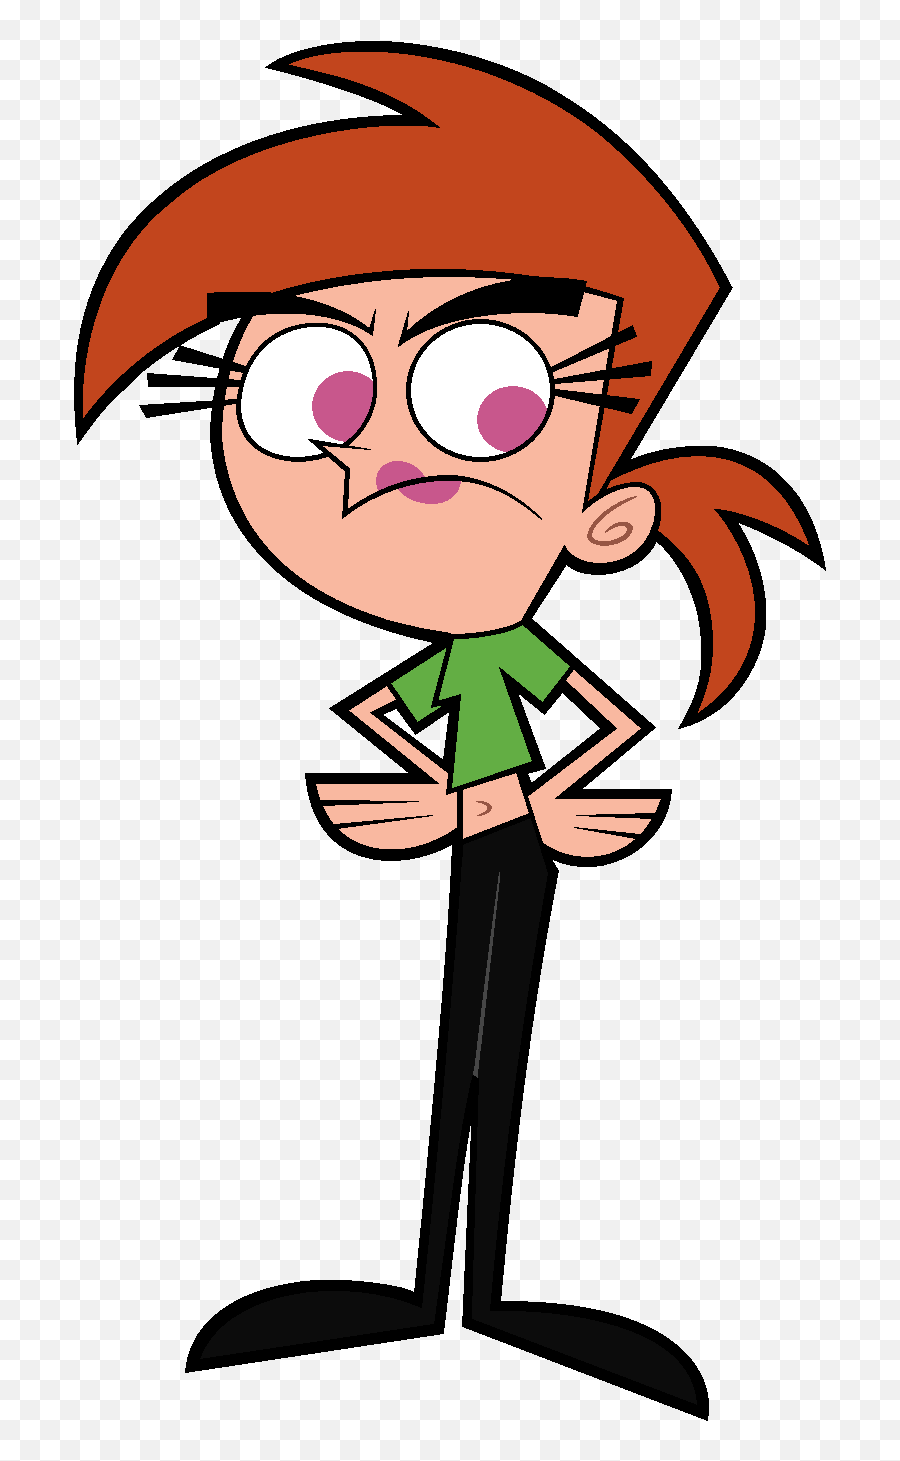 Vicky - Character Fairly Odd Parents Emoji,The Fairly Oddparents Emotion Commotion And Inside Out